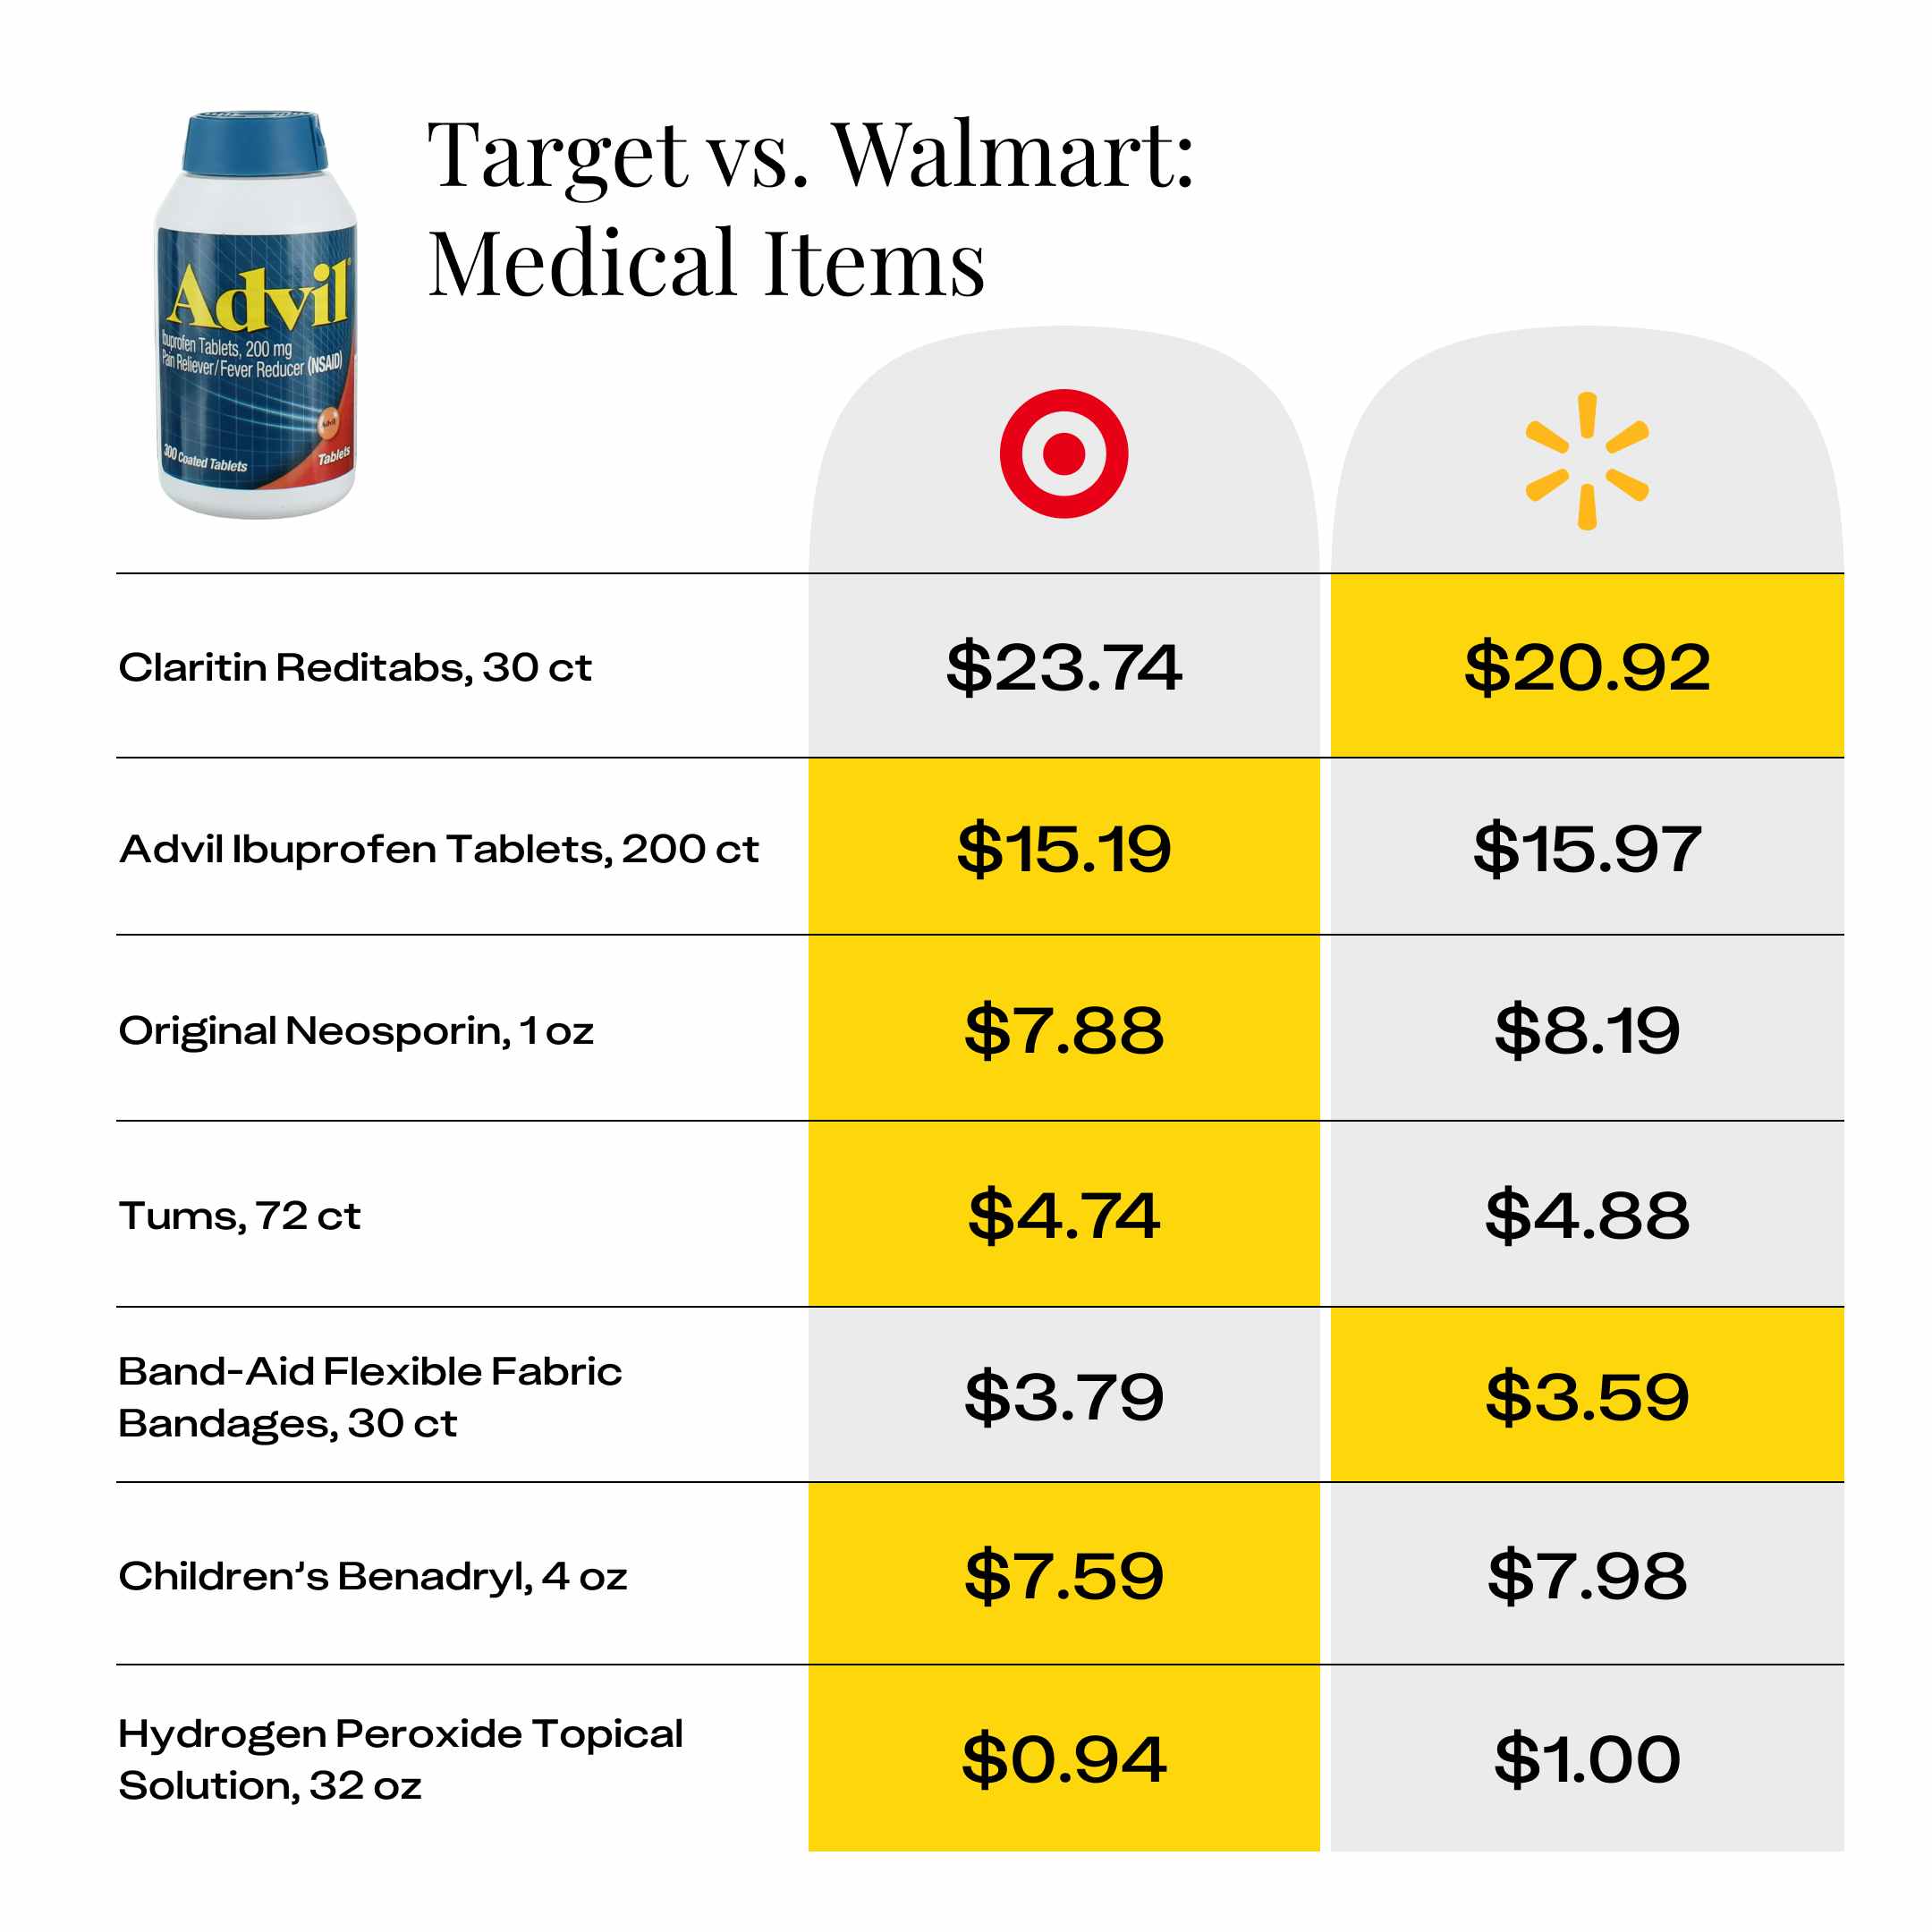 Walmart and Target Compared: Pictures, Details